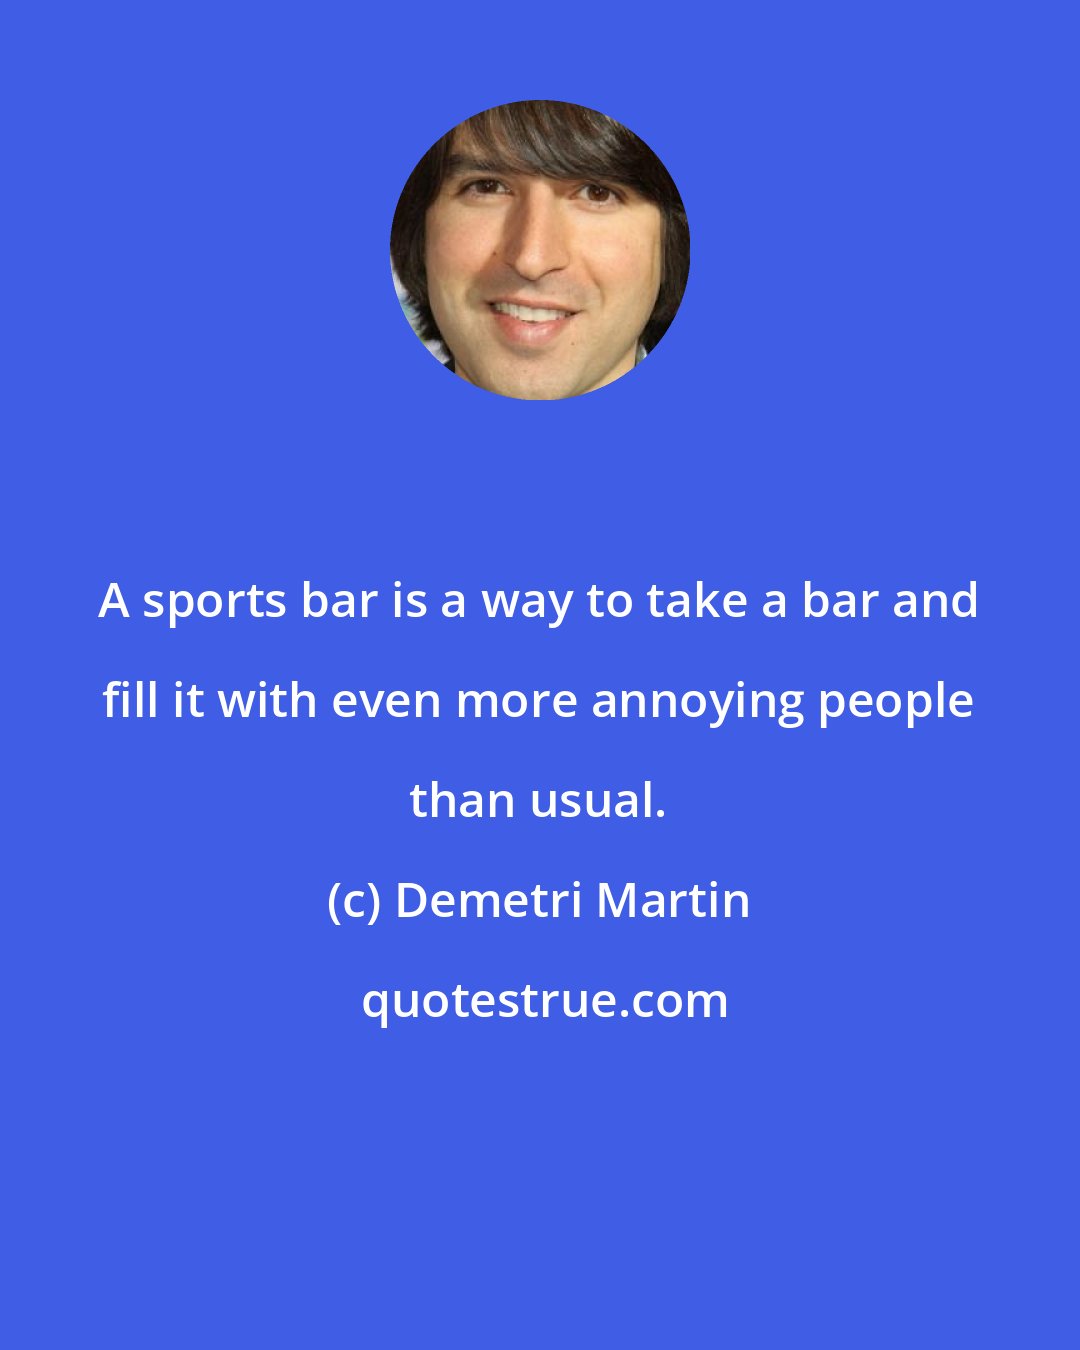 Demetri Martin: A sports bar is a way to take a bar and fill it with even more annoying people than usual.